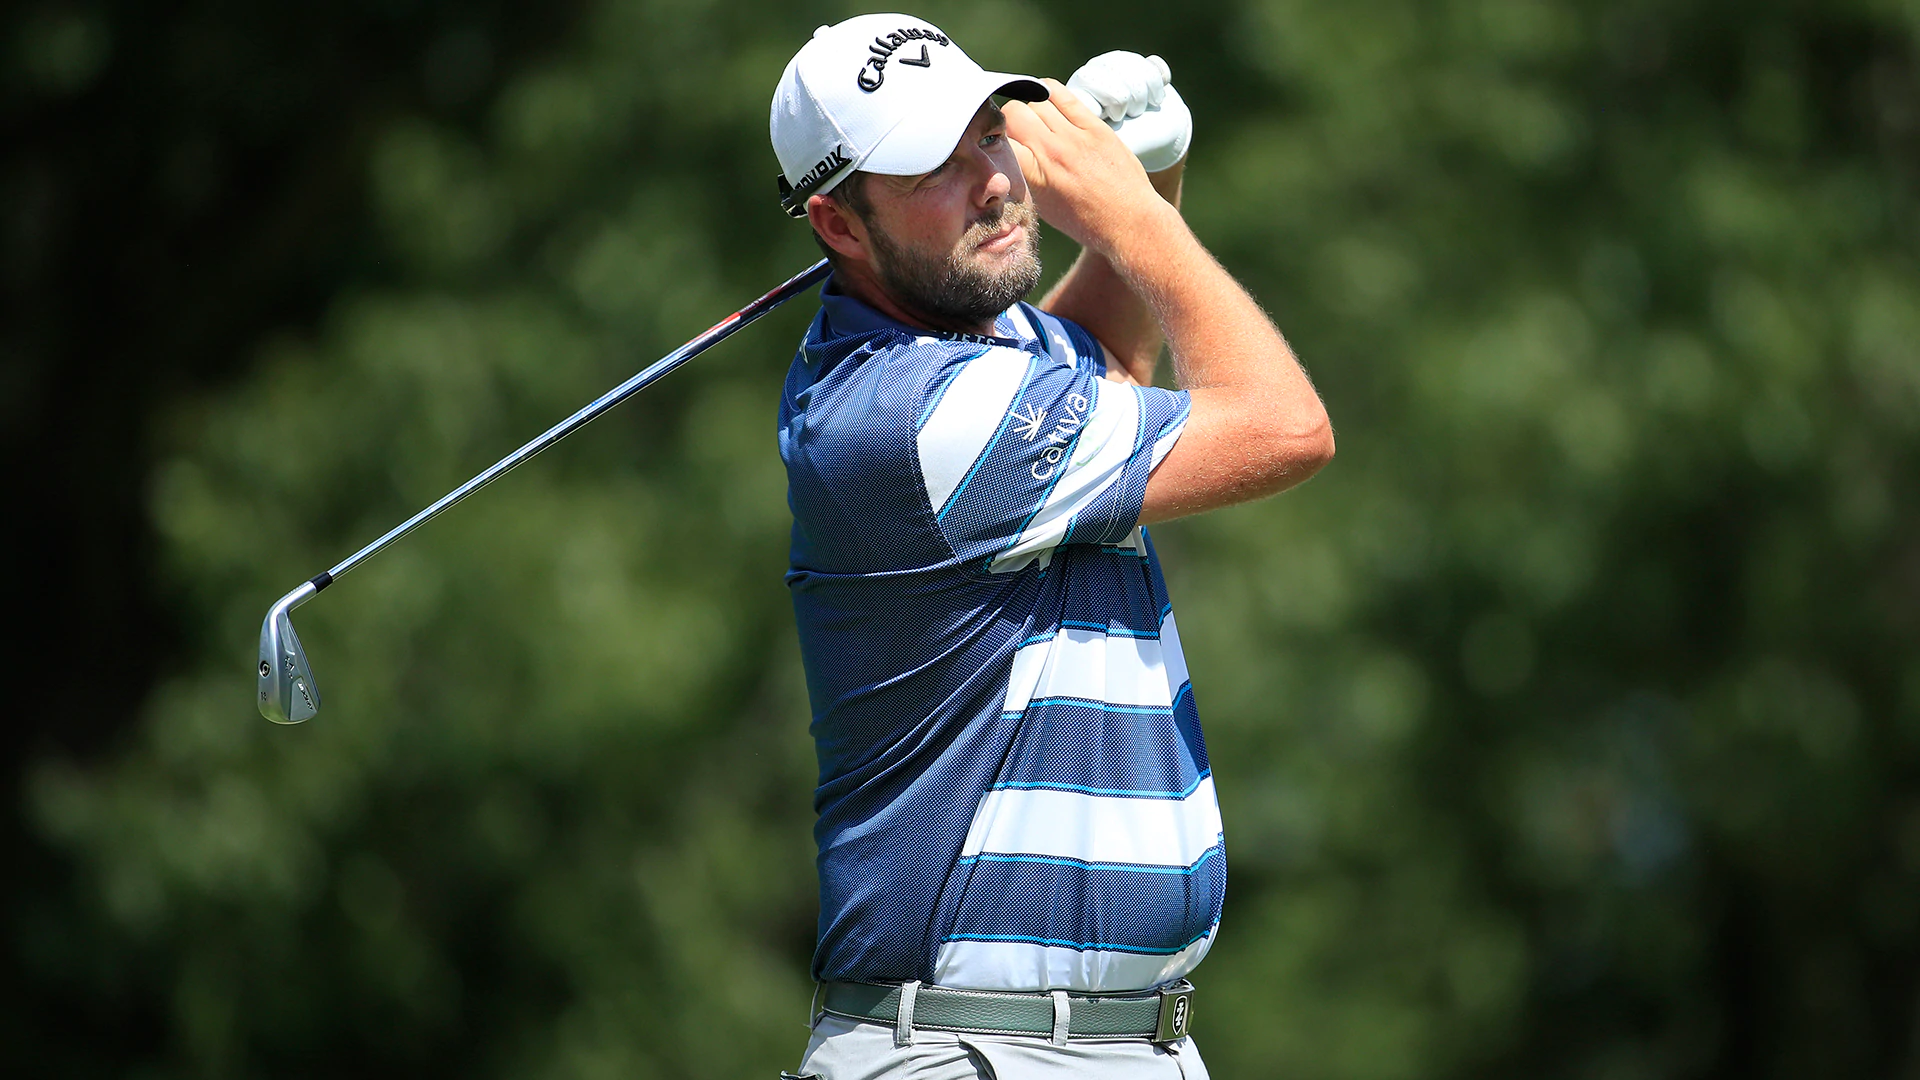 Marc Leishman’s playoff run is not over despite 30-over performance at BMW